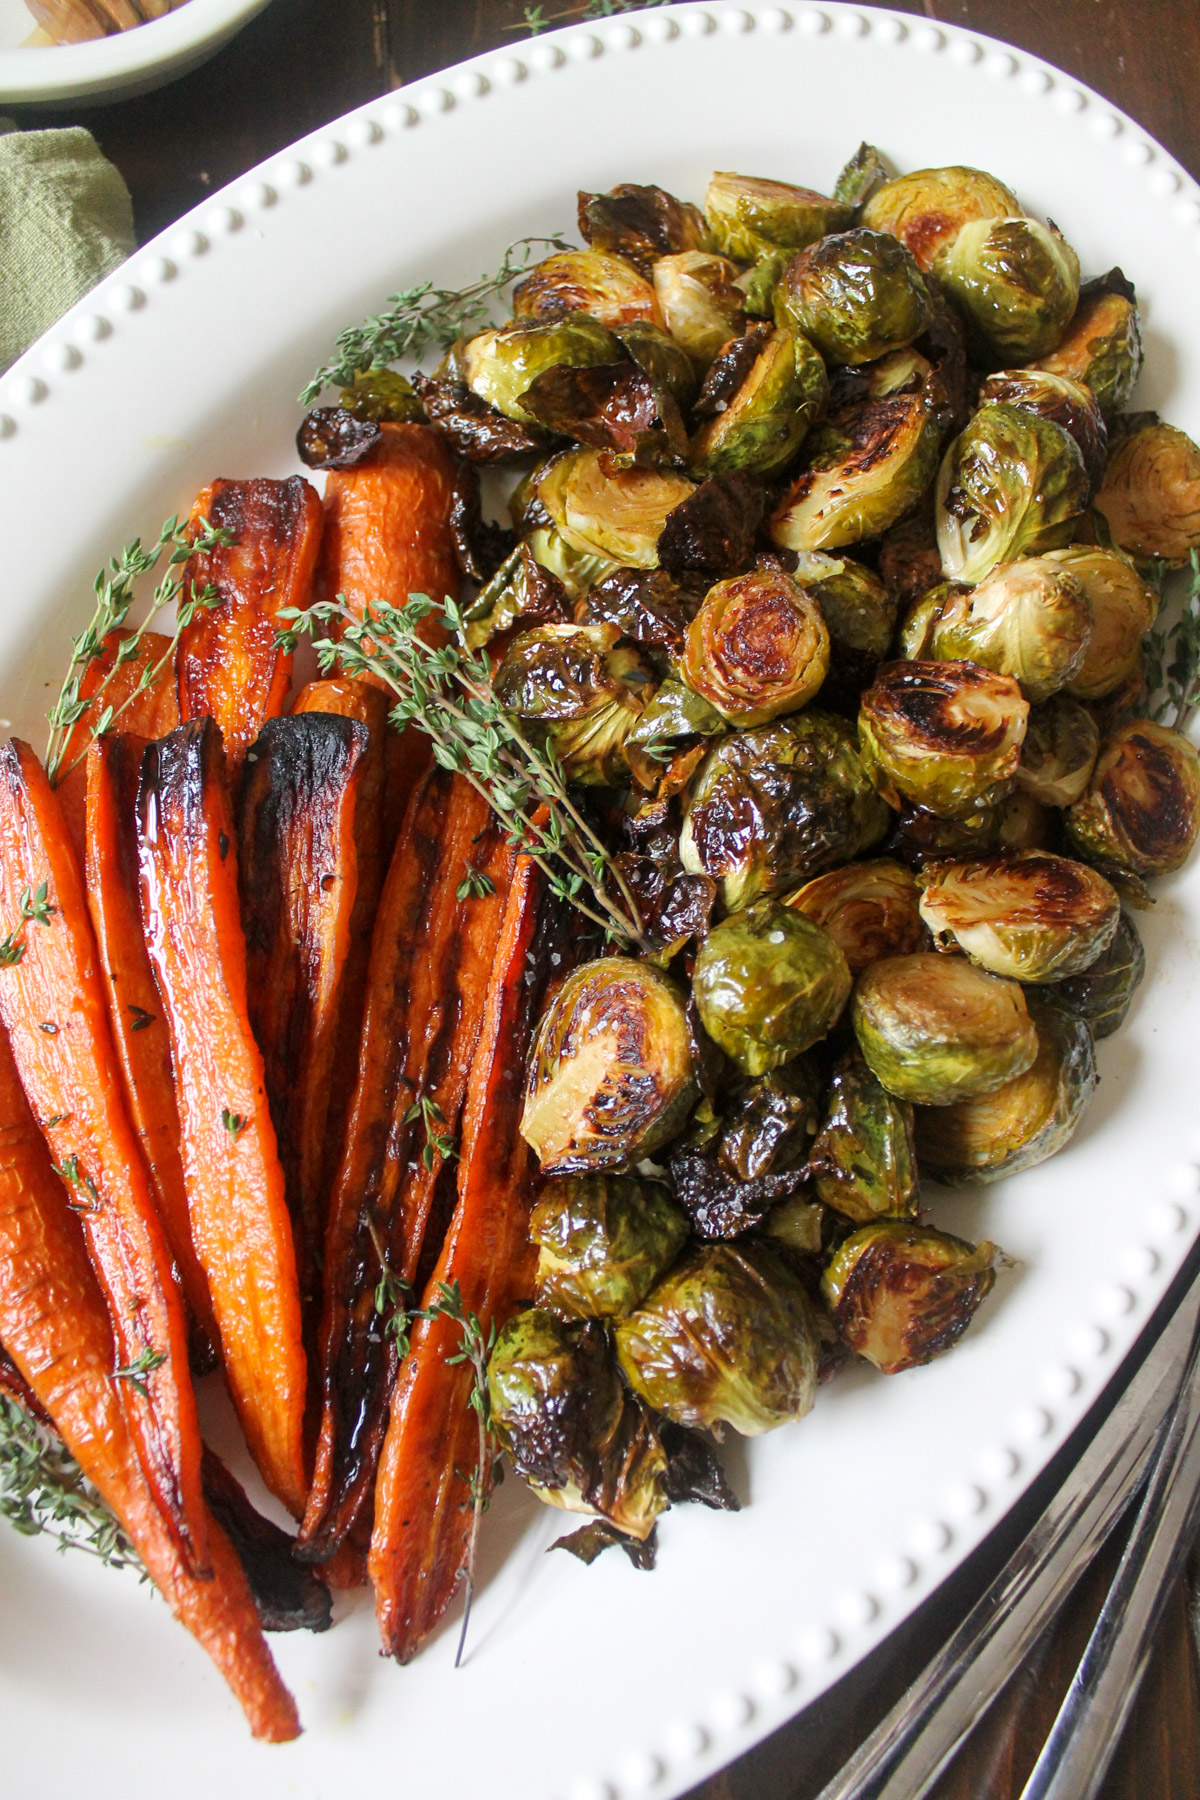 A holiday side dish platter of oven roasted Brussel sprouts and carrots.